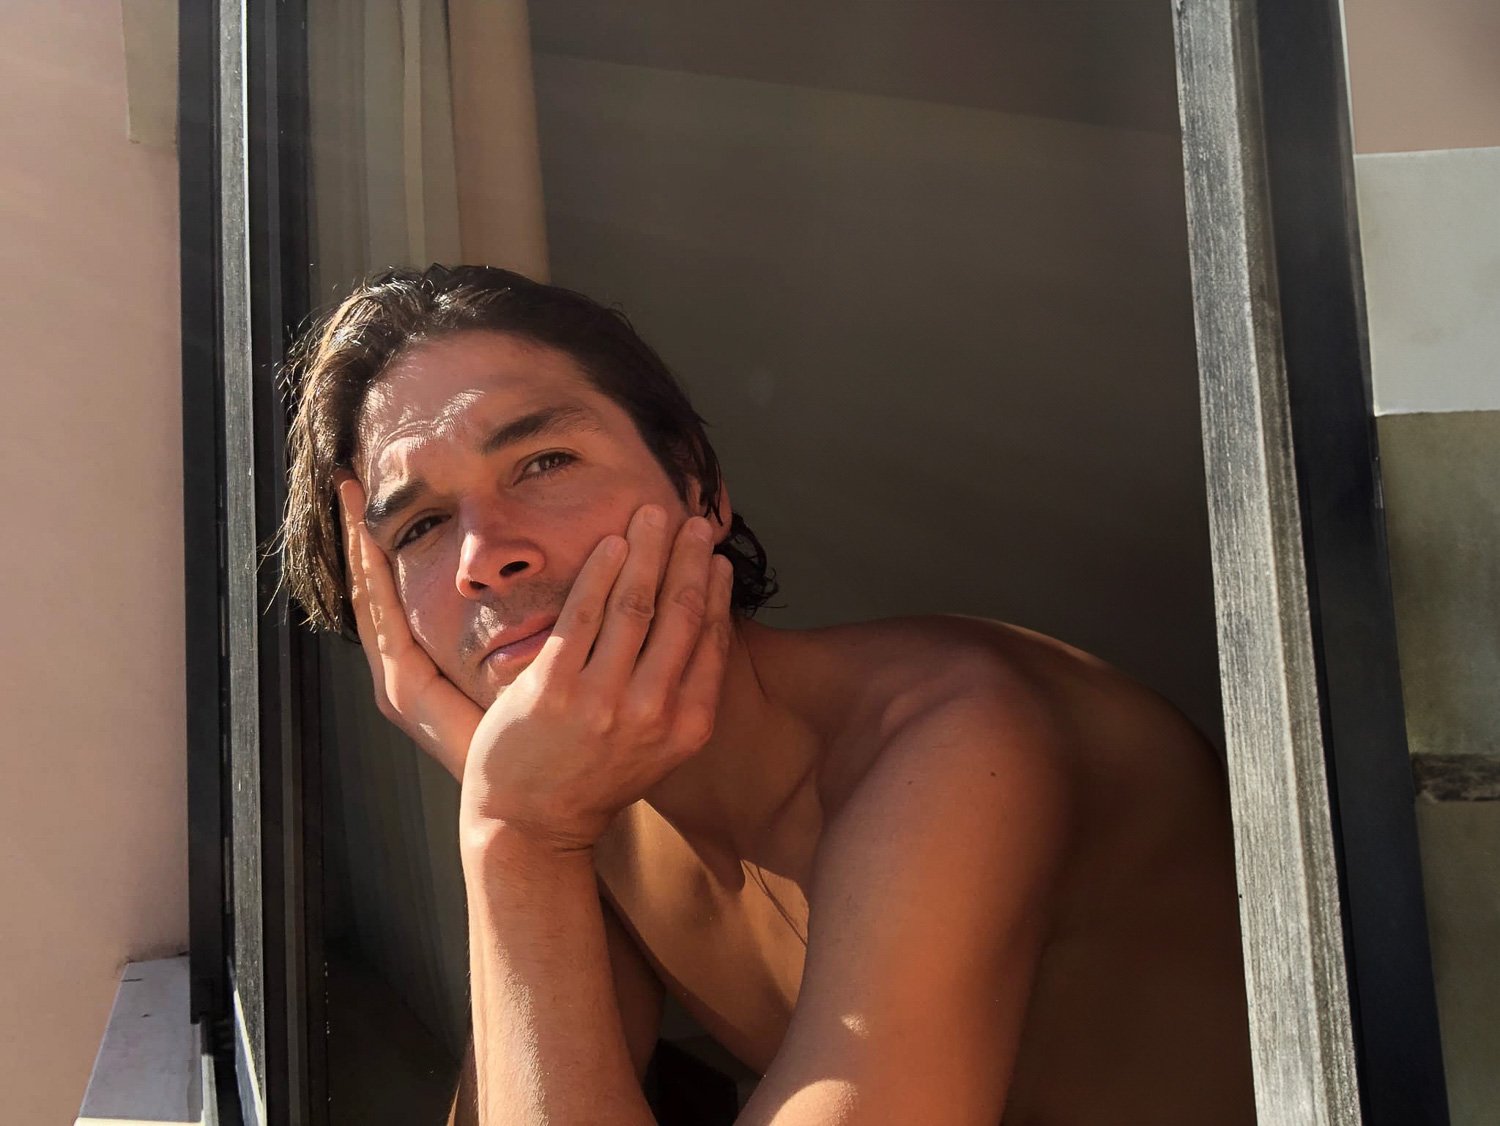 A topless man staring out of a sunlit window